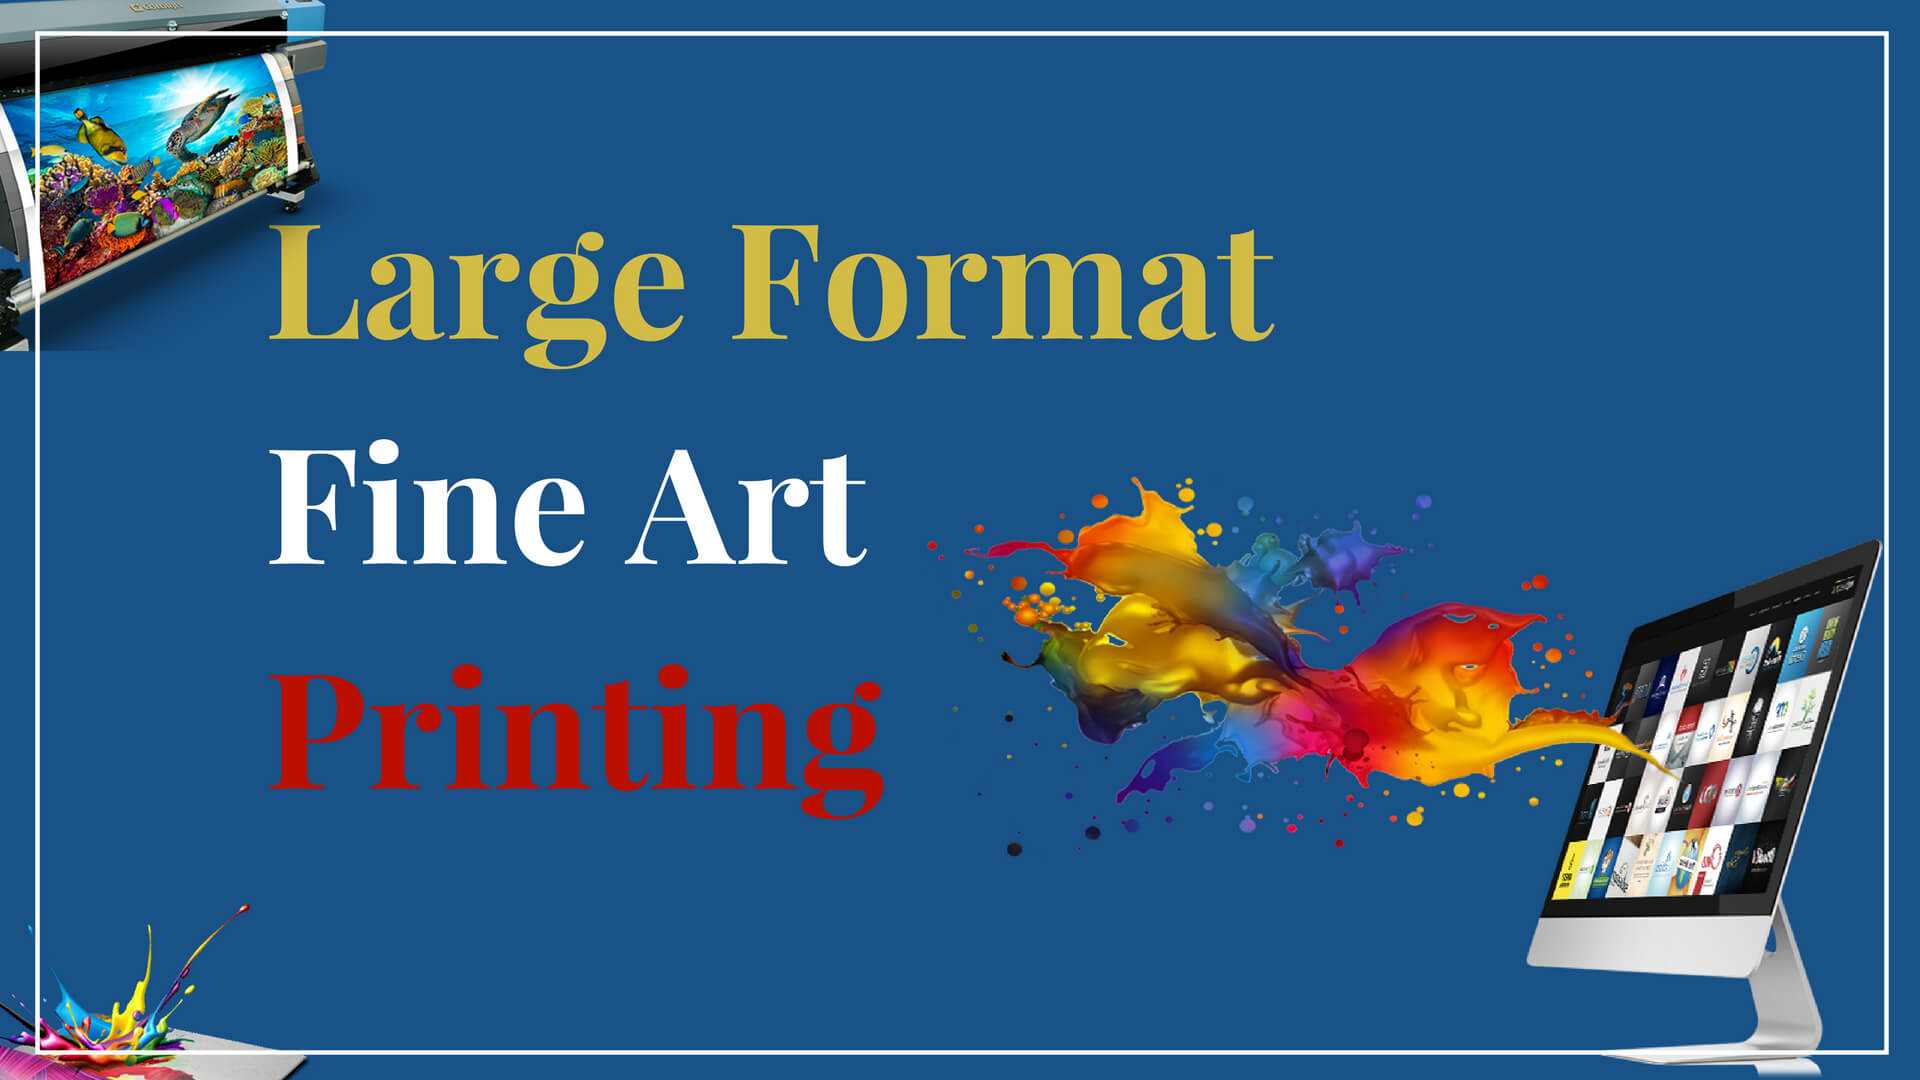 How To Prepare Your Photos For Large Format Fine Art Printing